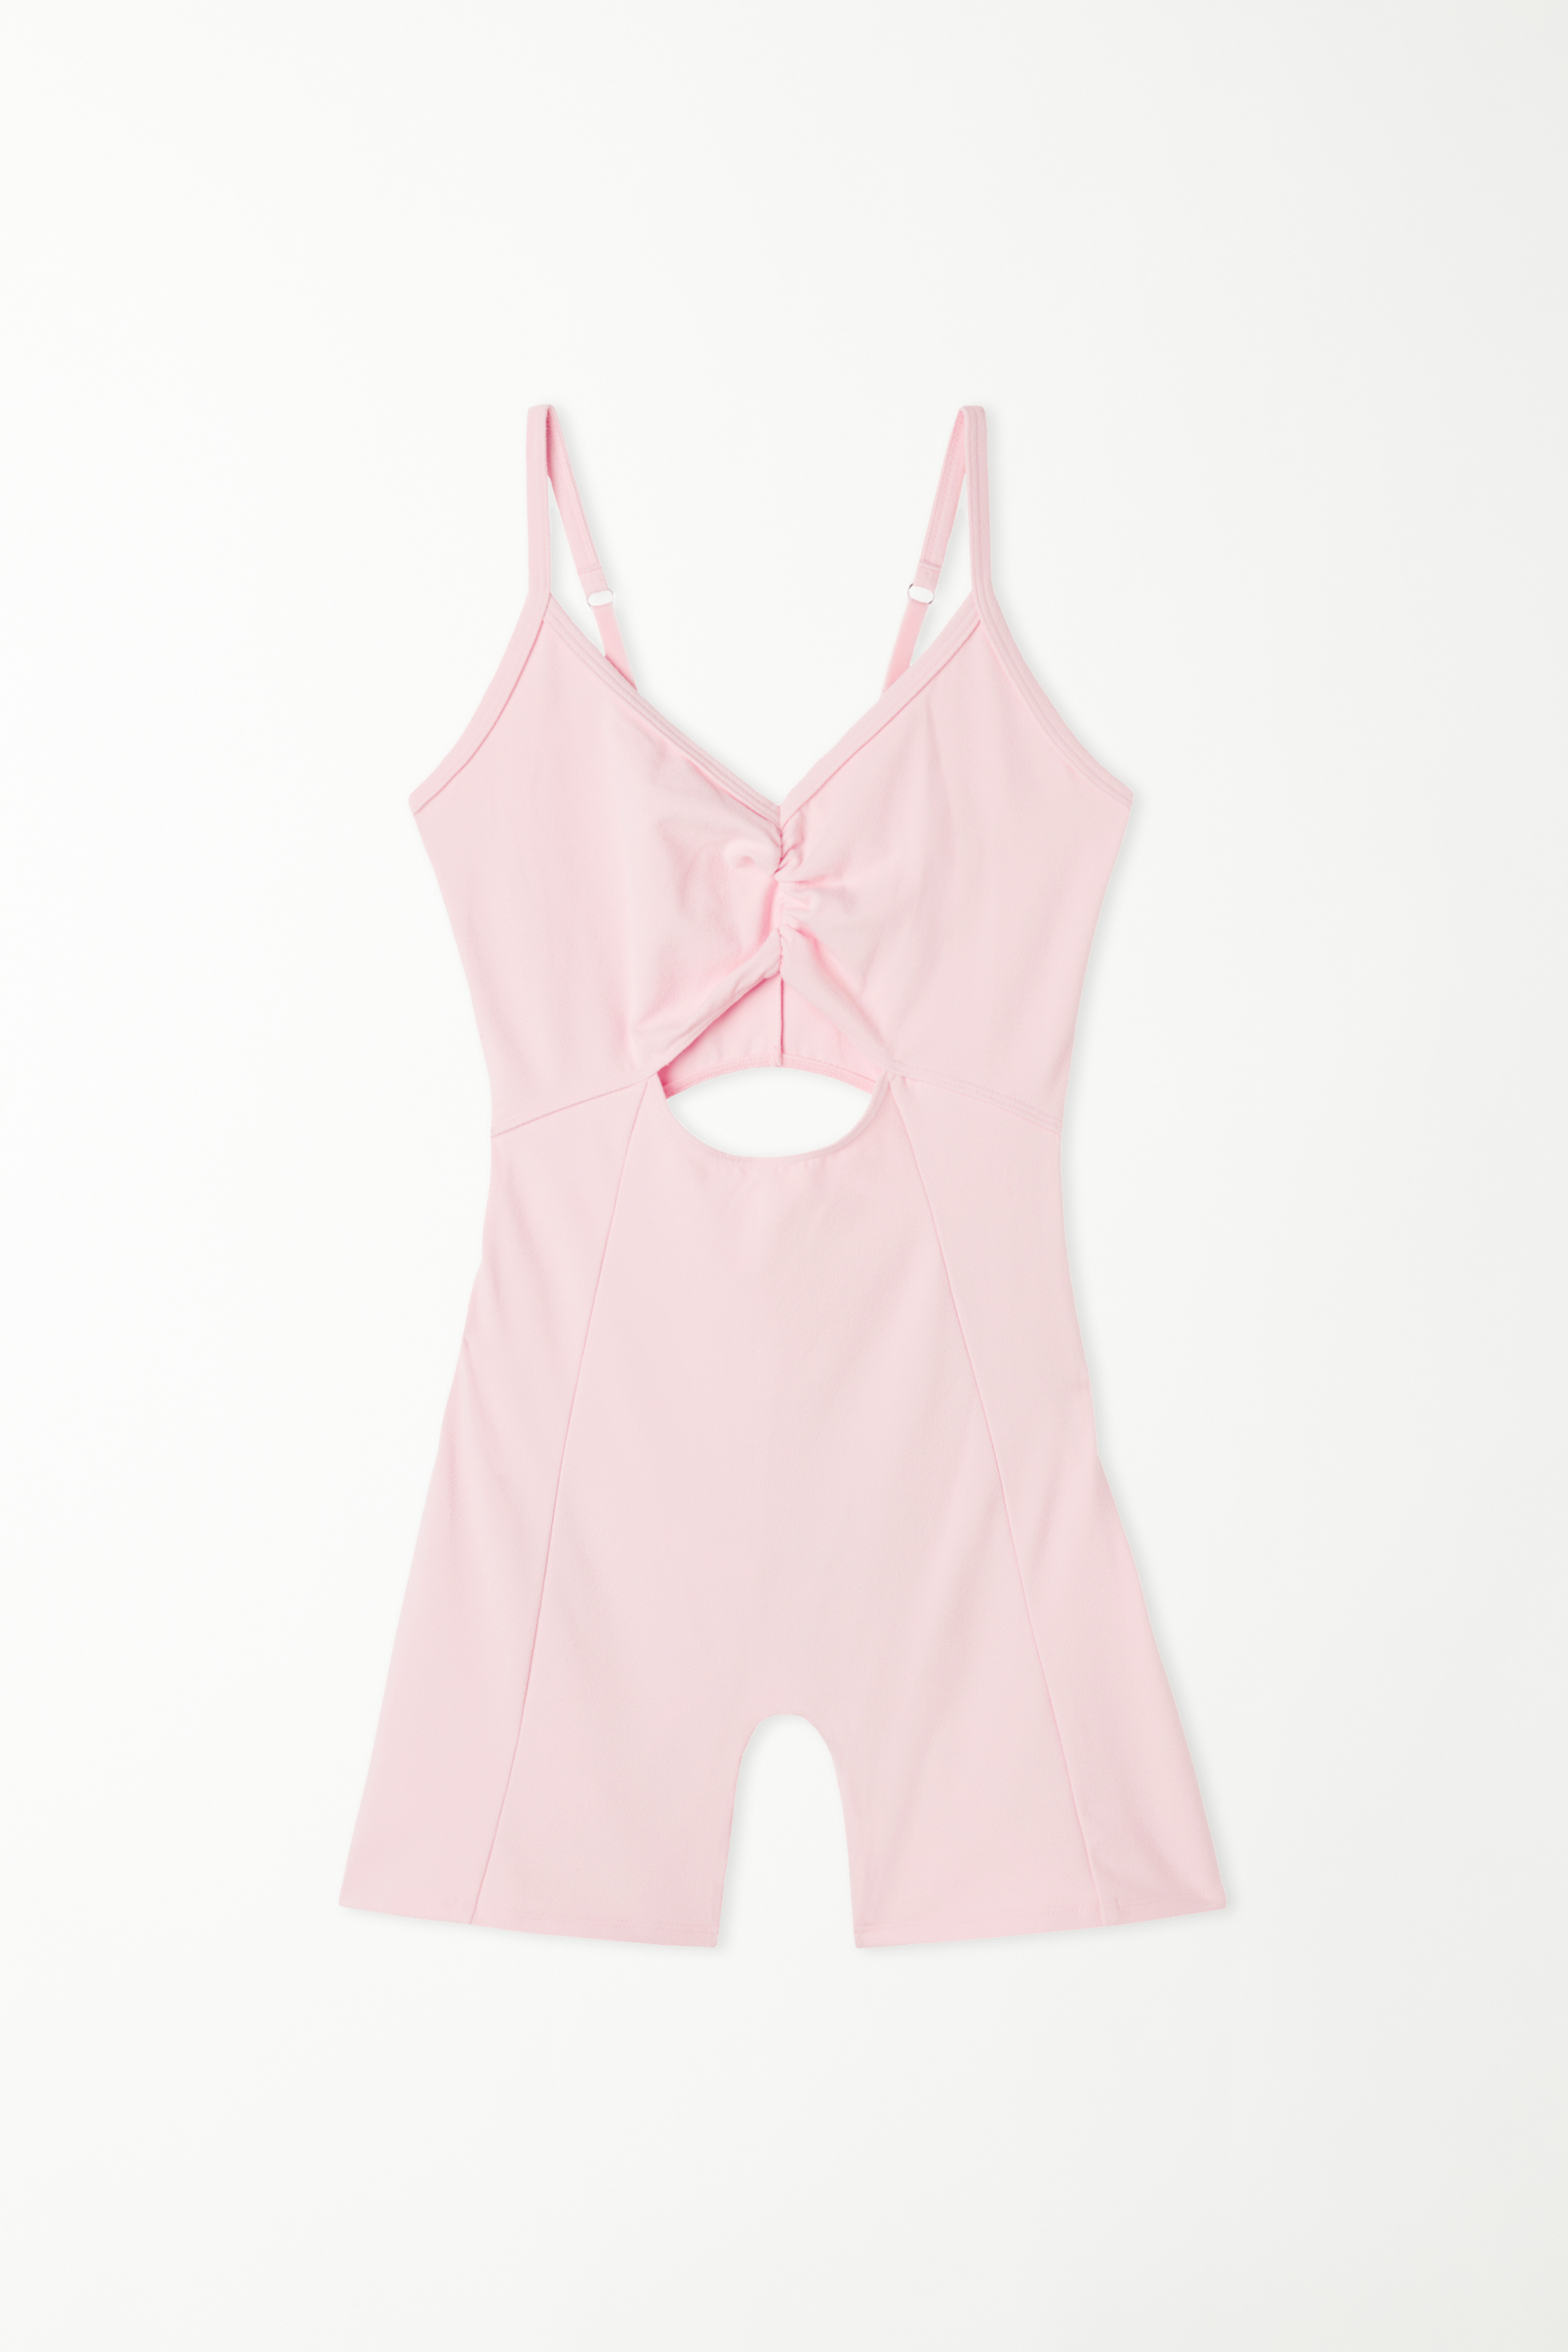 Soft Microfibre Short Bodysuit with Narrow Shoulder Straps and Gathering